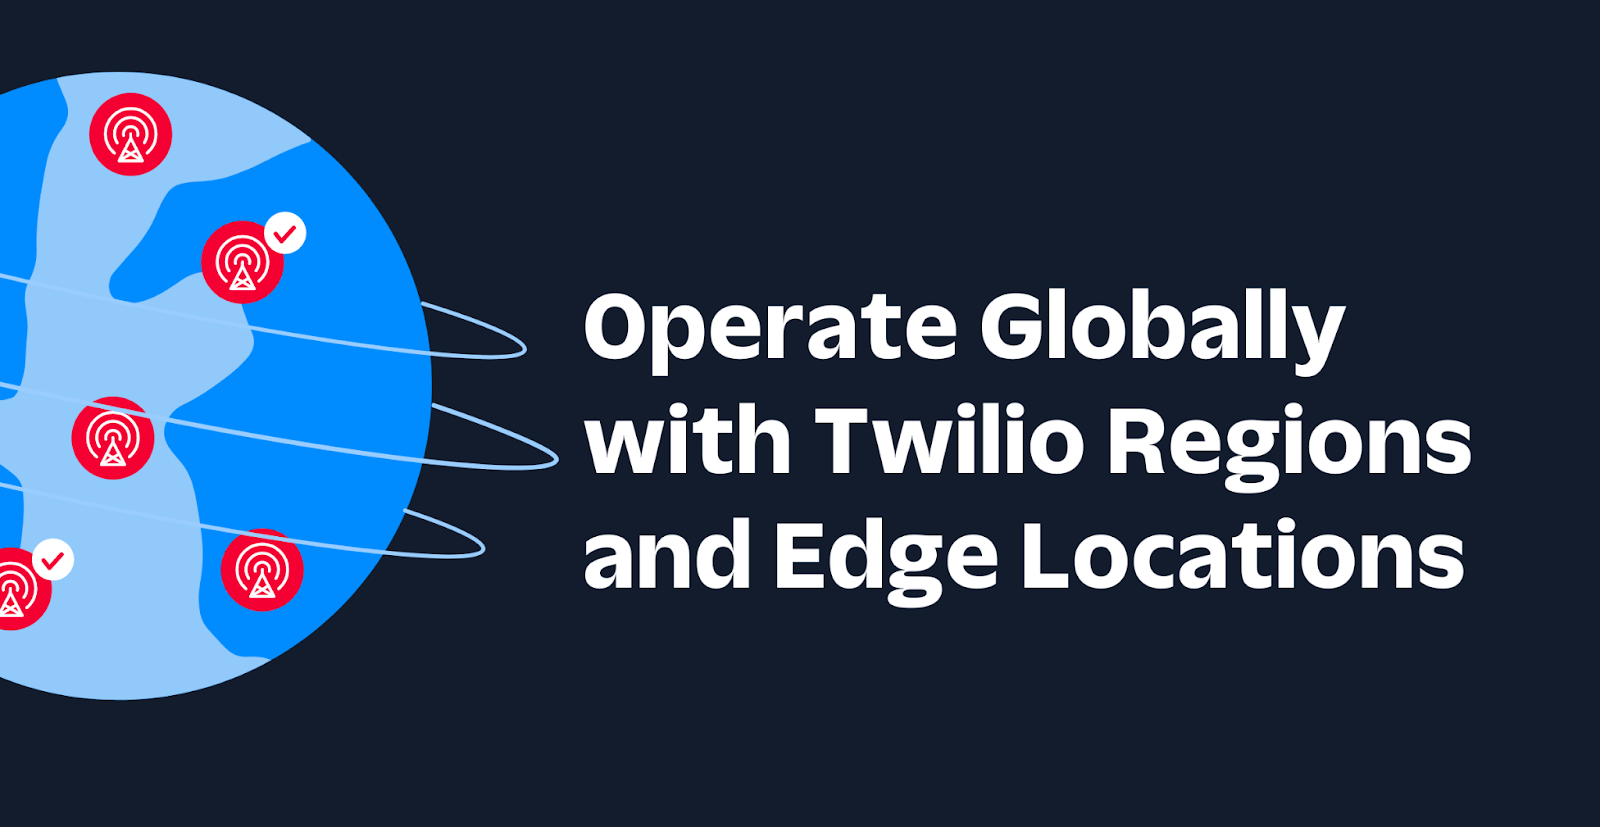 Operate Globally with Twilio Regions and Edge Locations